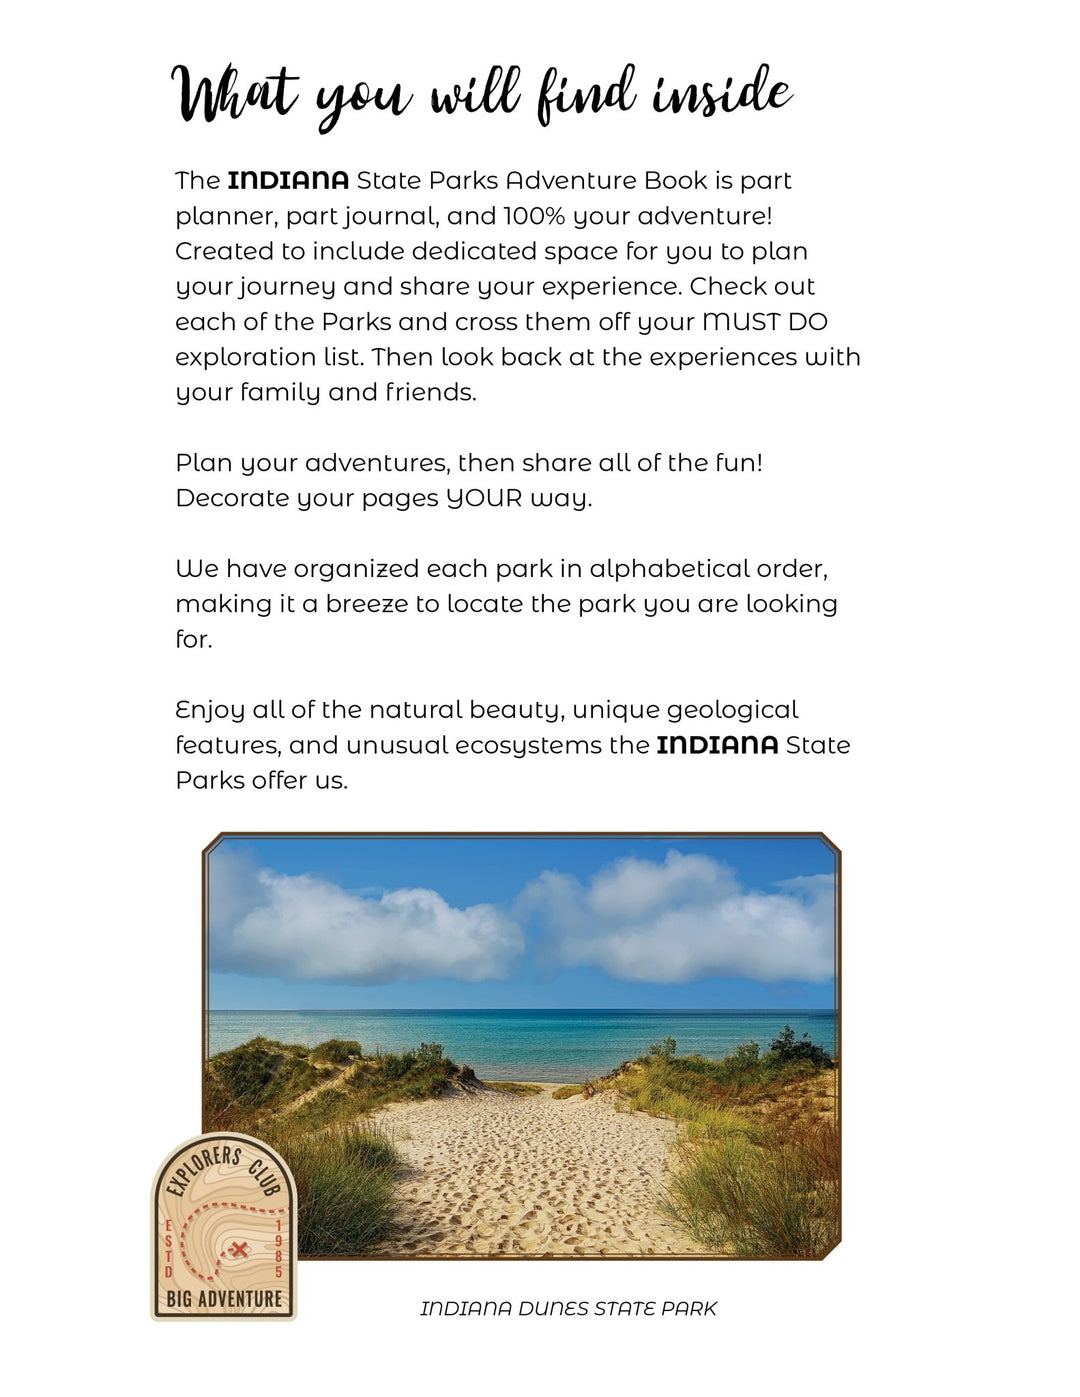 Indiana State Parks - DIGITAL DOWNLOAD - Adventure Planning Journal - My Nature Book Adventures